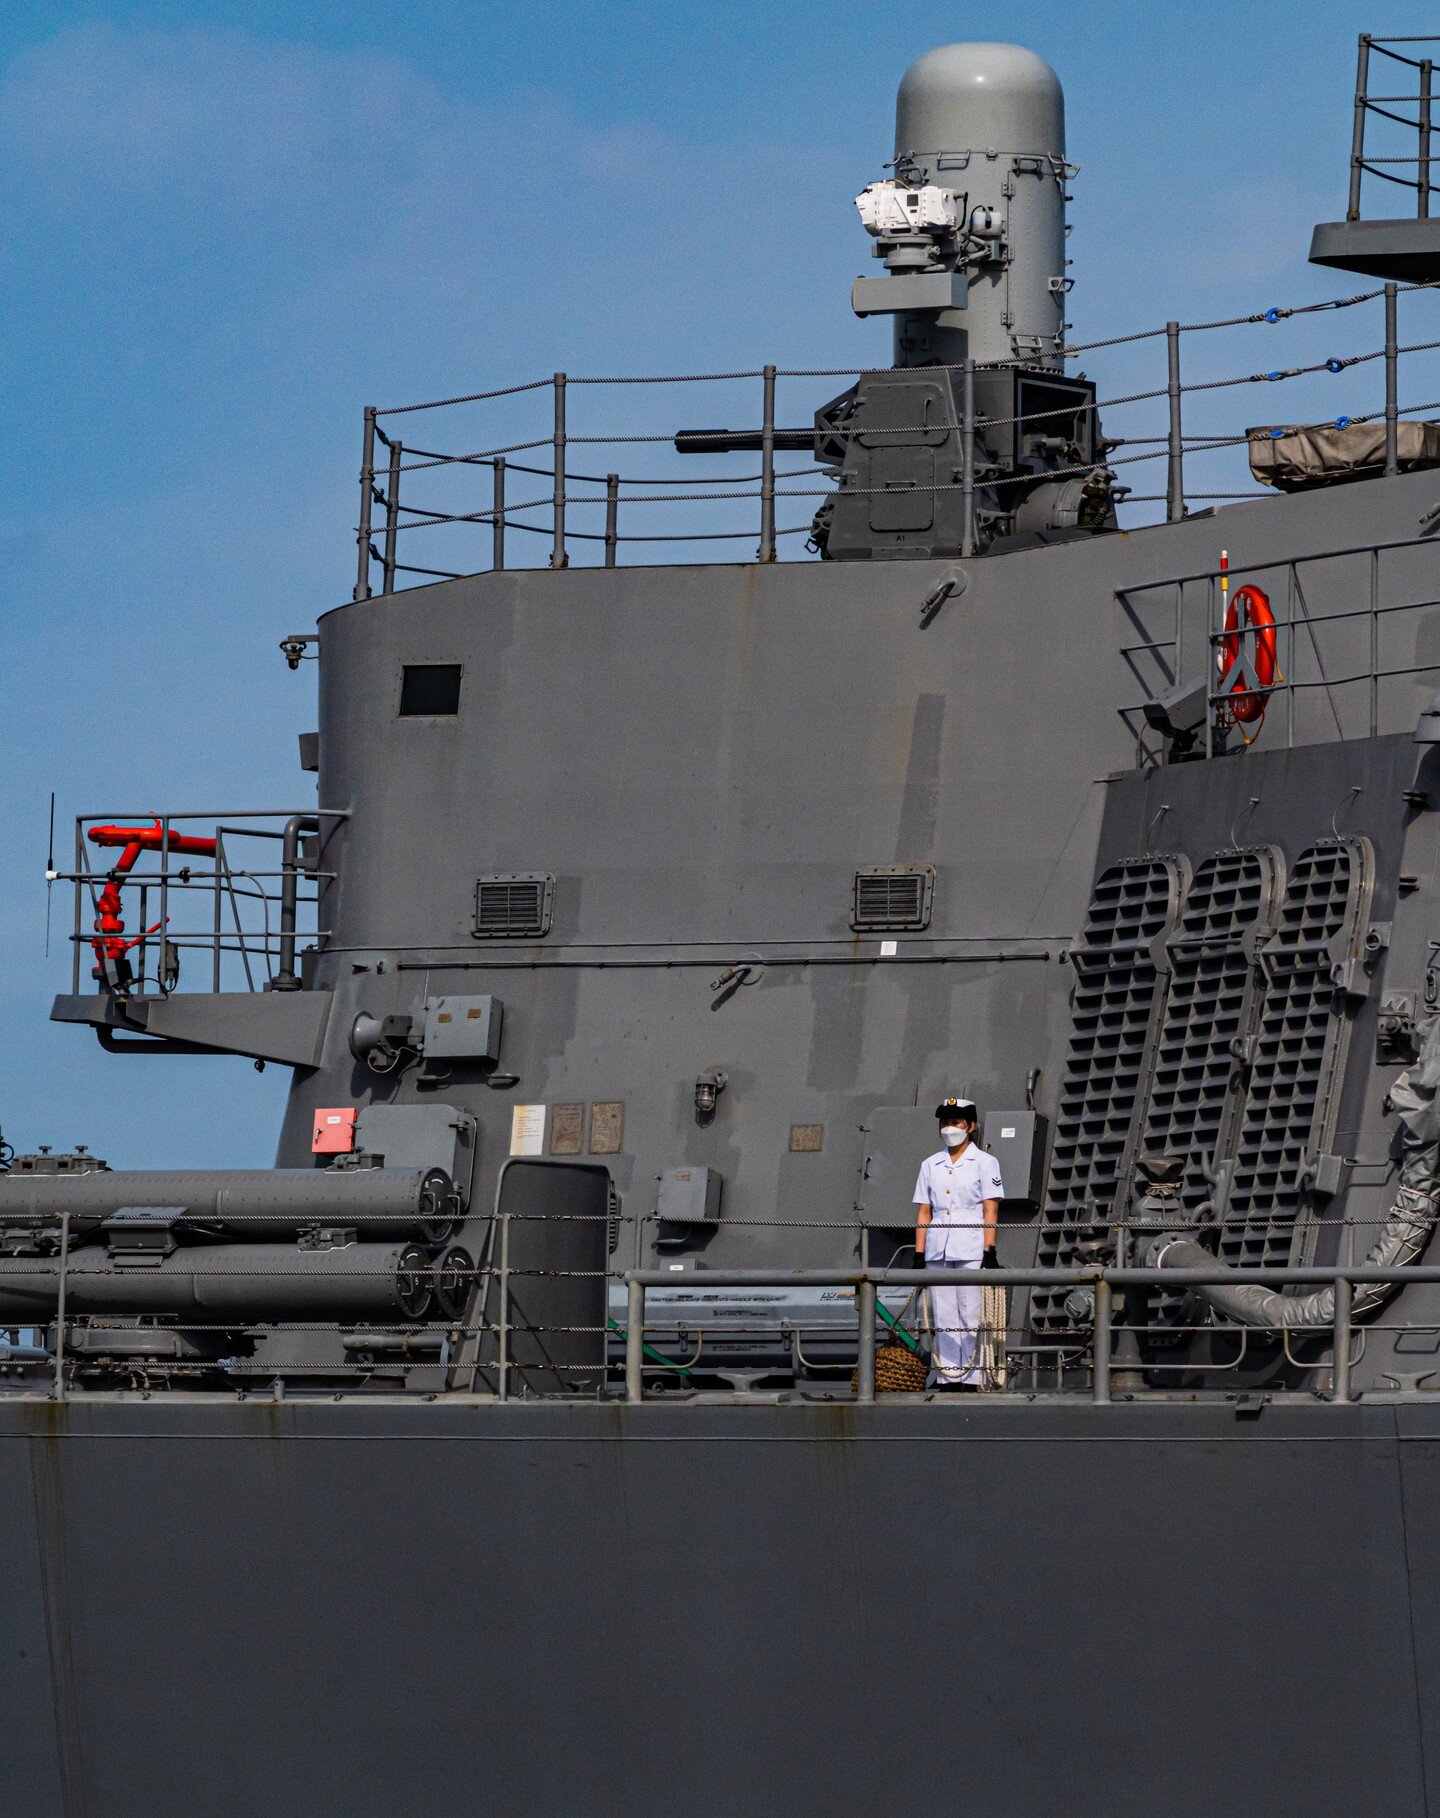 And now back to #photos of the #jmsdf #japanmaritimeselfdefenseforce #destroyer #kirishima

The crew were all on the #deck of the #ship as they prepared to ship out. 

I still have a few more batches of#photography of the #warship on the way!

#海上自衛隊